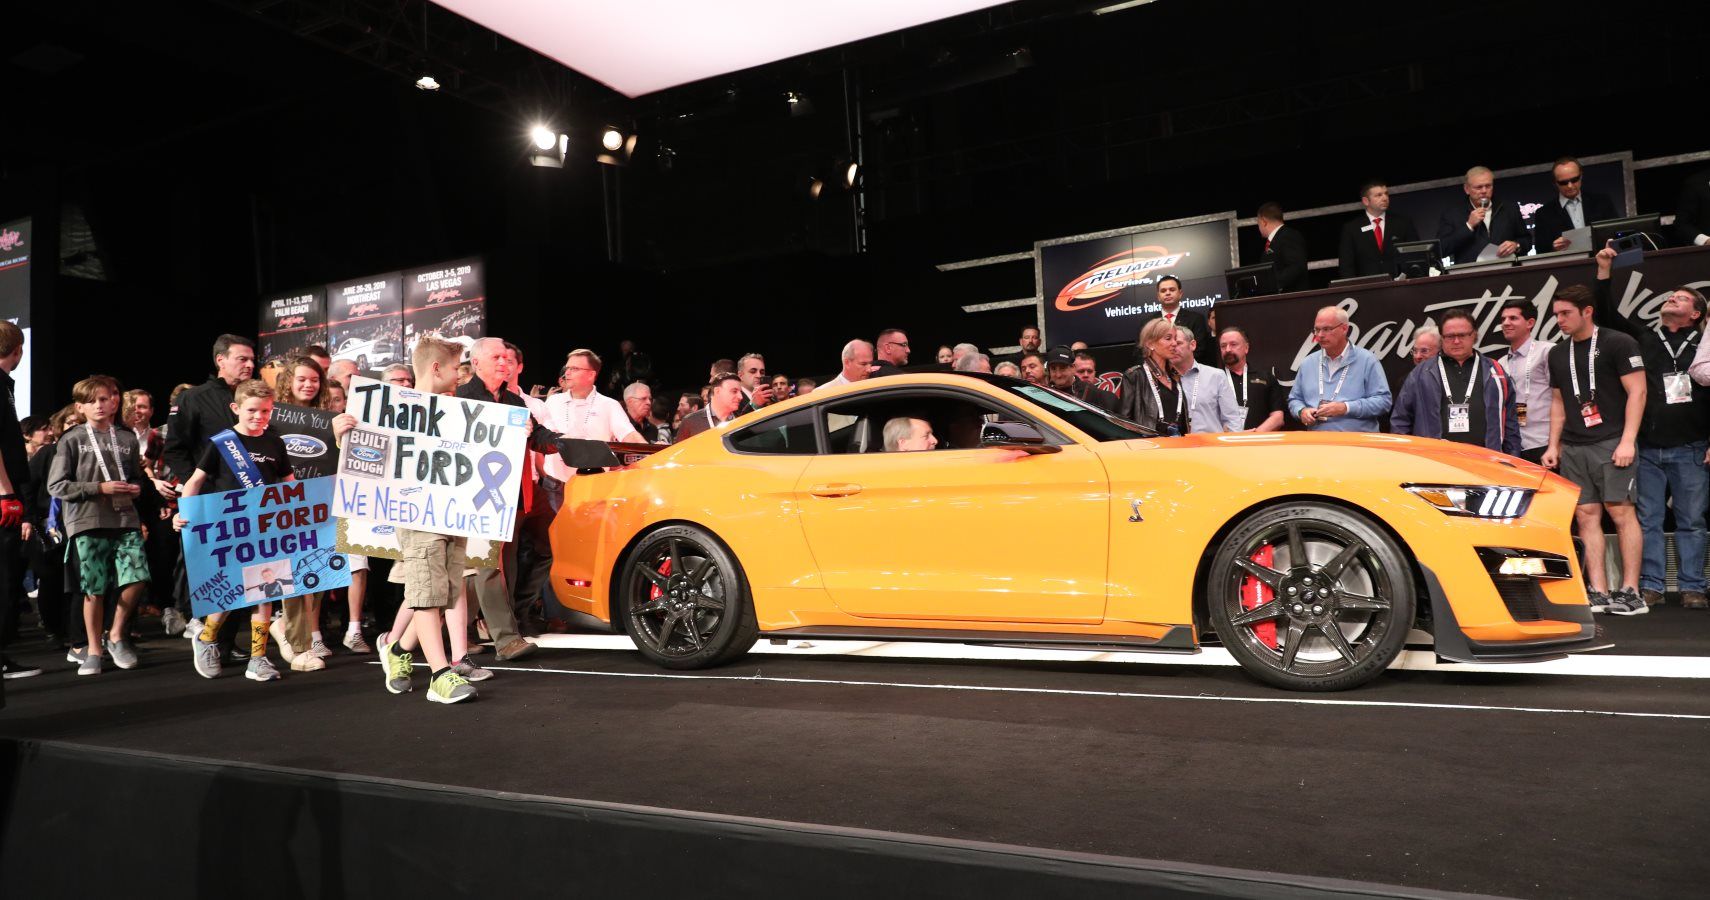 The very first model of the most powerful factory Mustang ever was auctioned for $1.1 million as it goes for the famed muscle car’s biggest win ever – trying to help researchers cure children with type 1 diabetes. Craig Jackson, chairman and CEO of Barrett-Jackson, was the winning bidder.